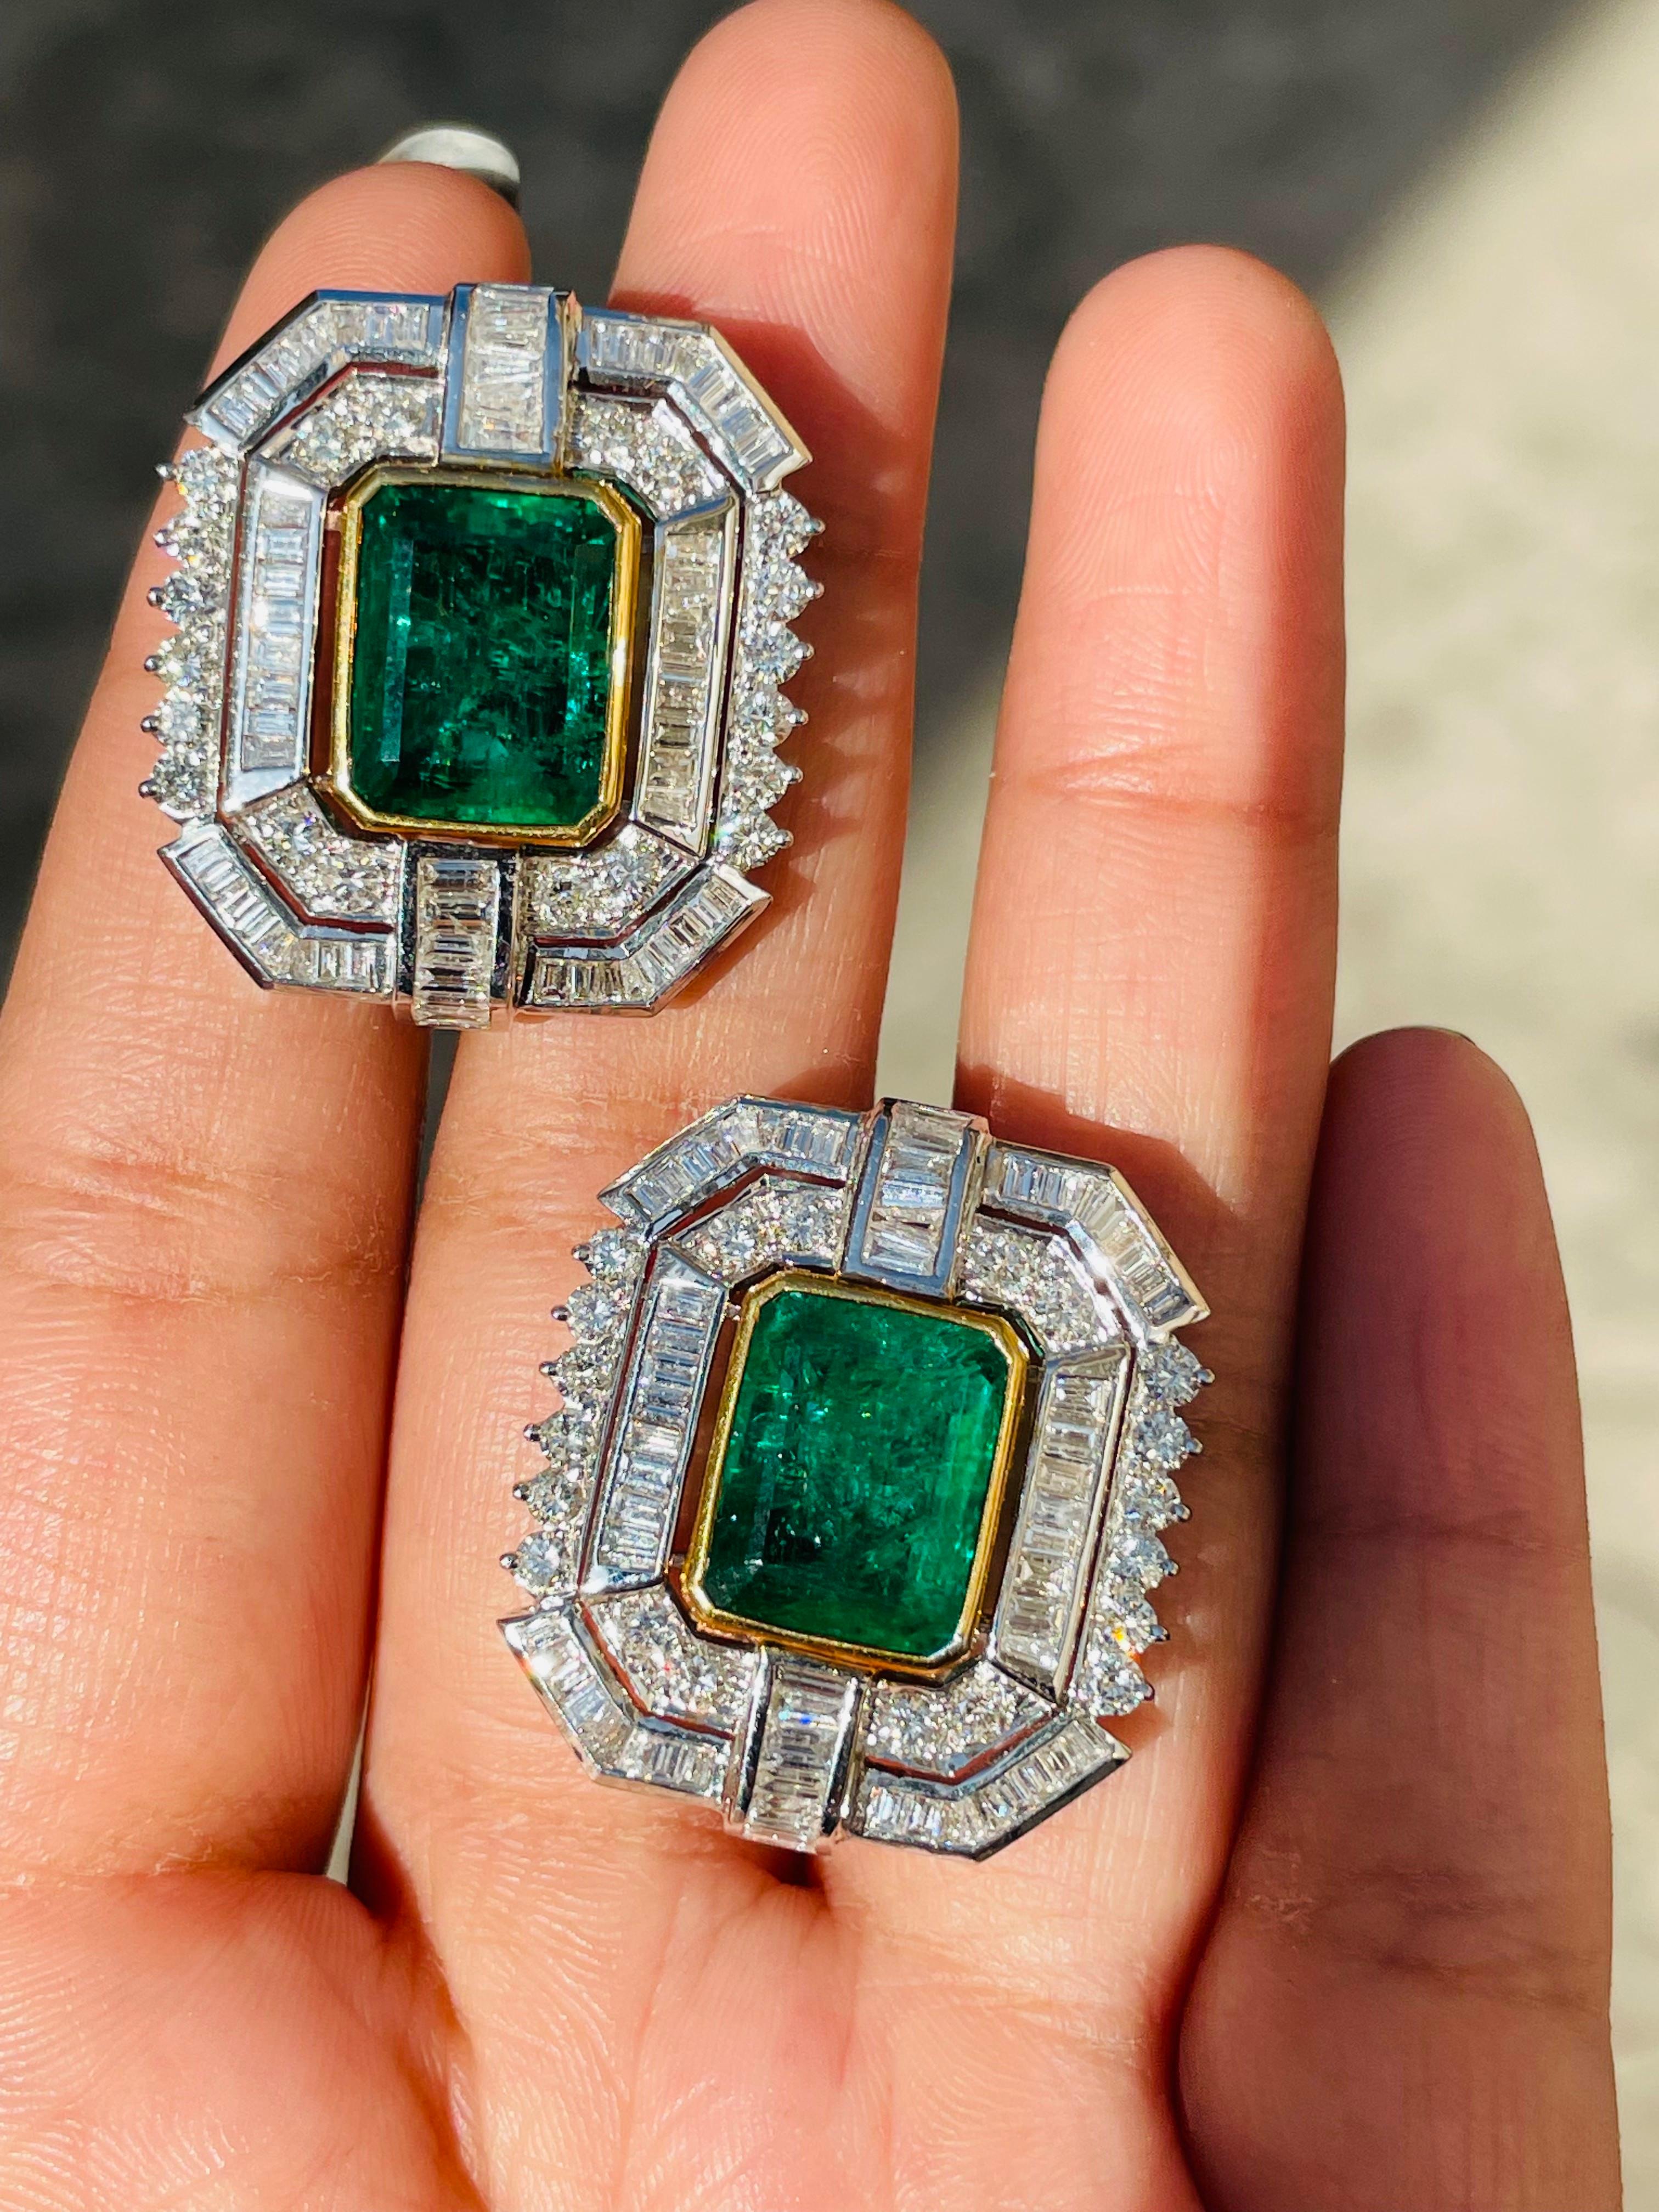 9.7 Carat Emerald Stud Earrings with Diamonds in 18K White Gold For Sale 1